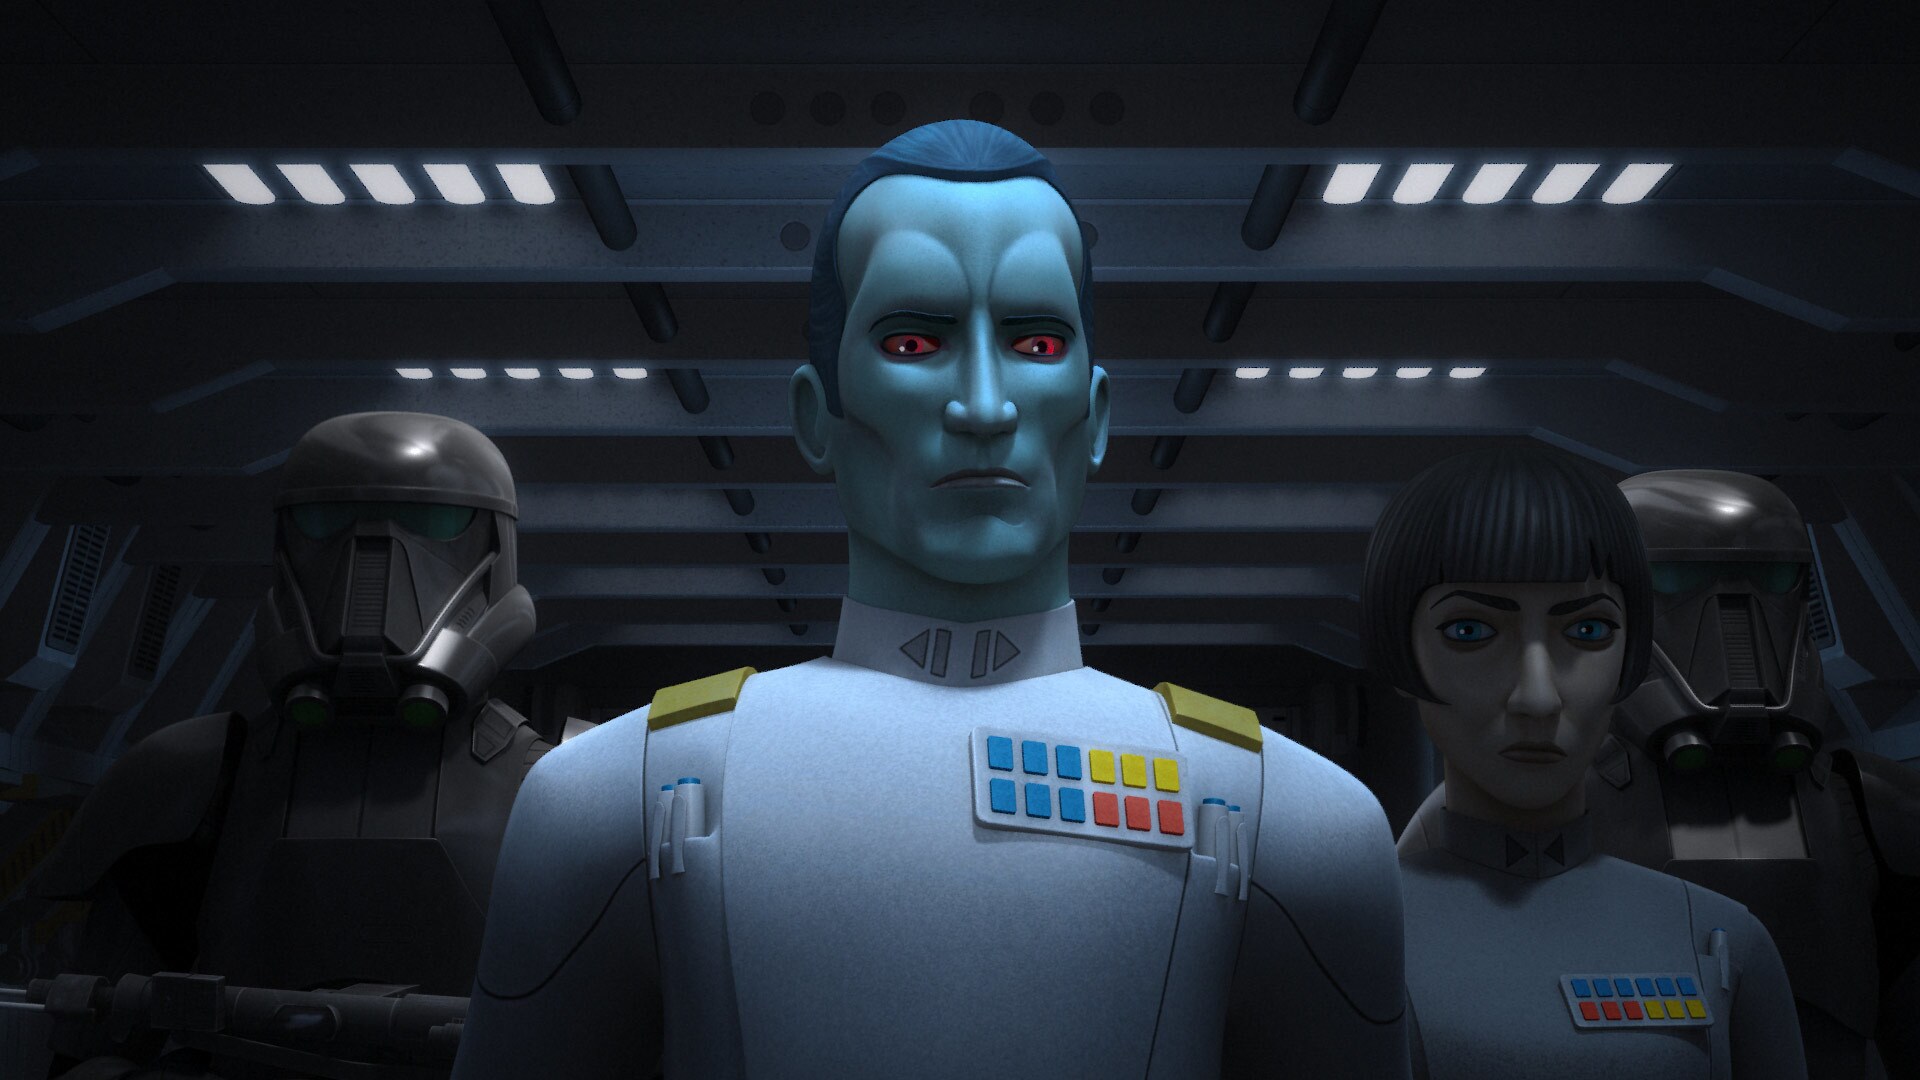 An unexpected visitor arrives, however: Grand Admiral Thrawn. He has come to inspect the TIE defe...